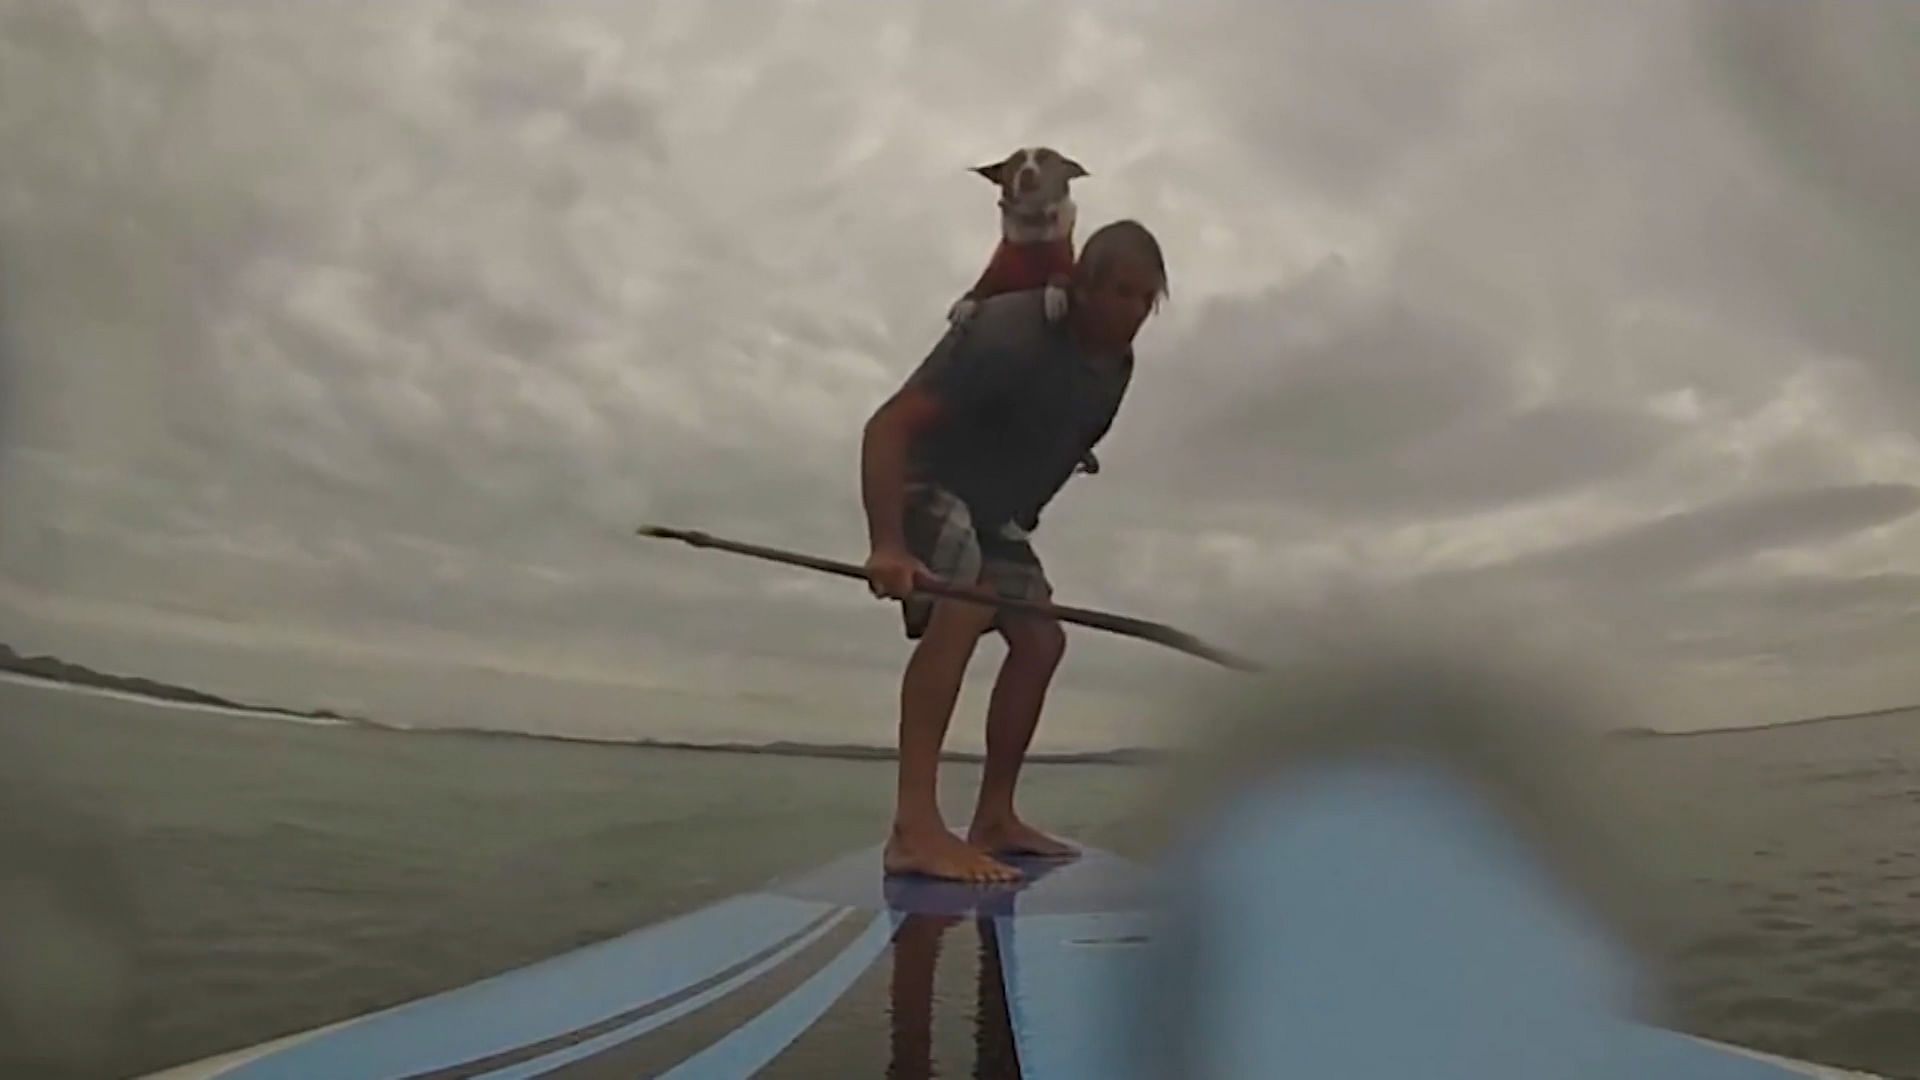 Chris and his dog Rama, doing stand up paddle surfing in Australia.(Photo: AP screengrab)